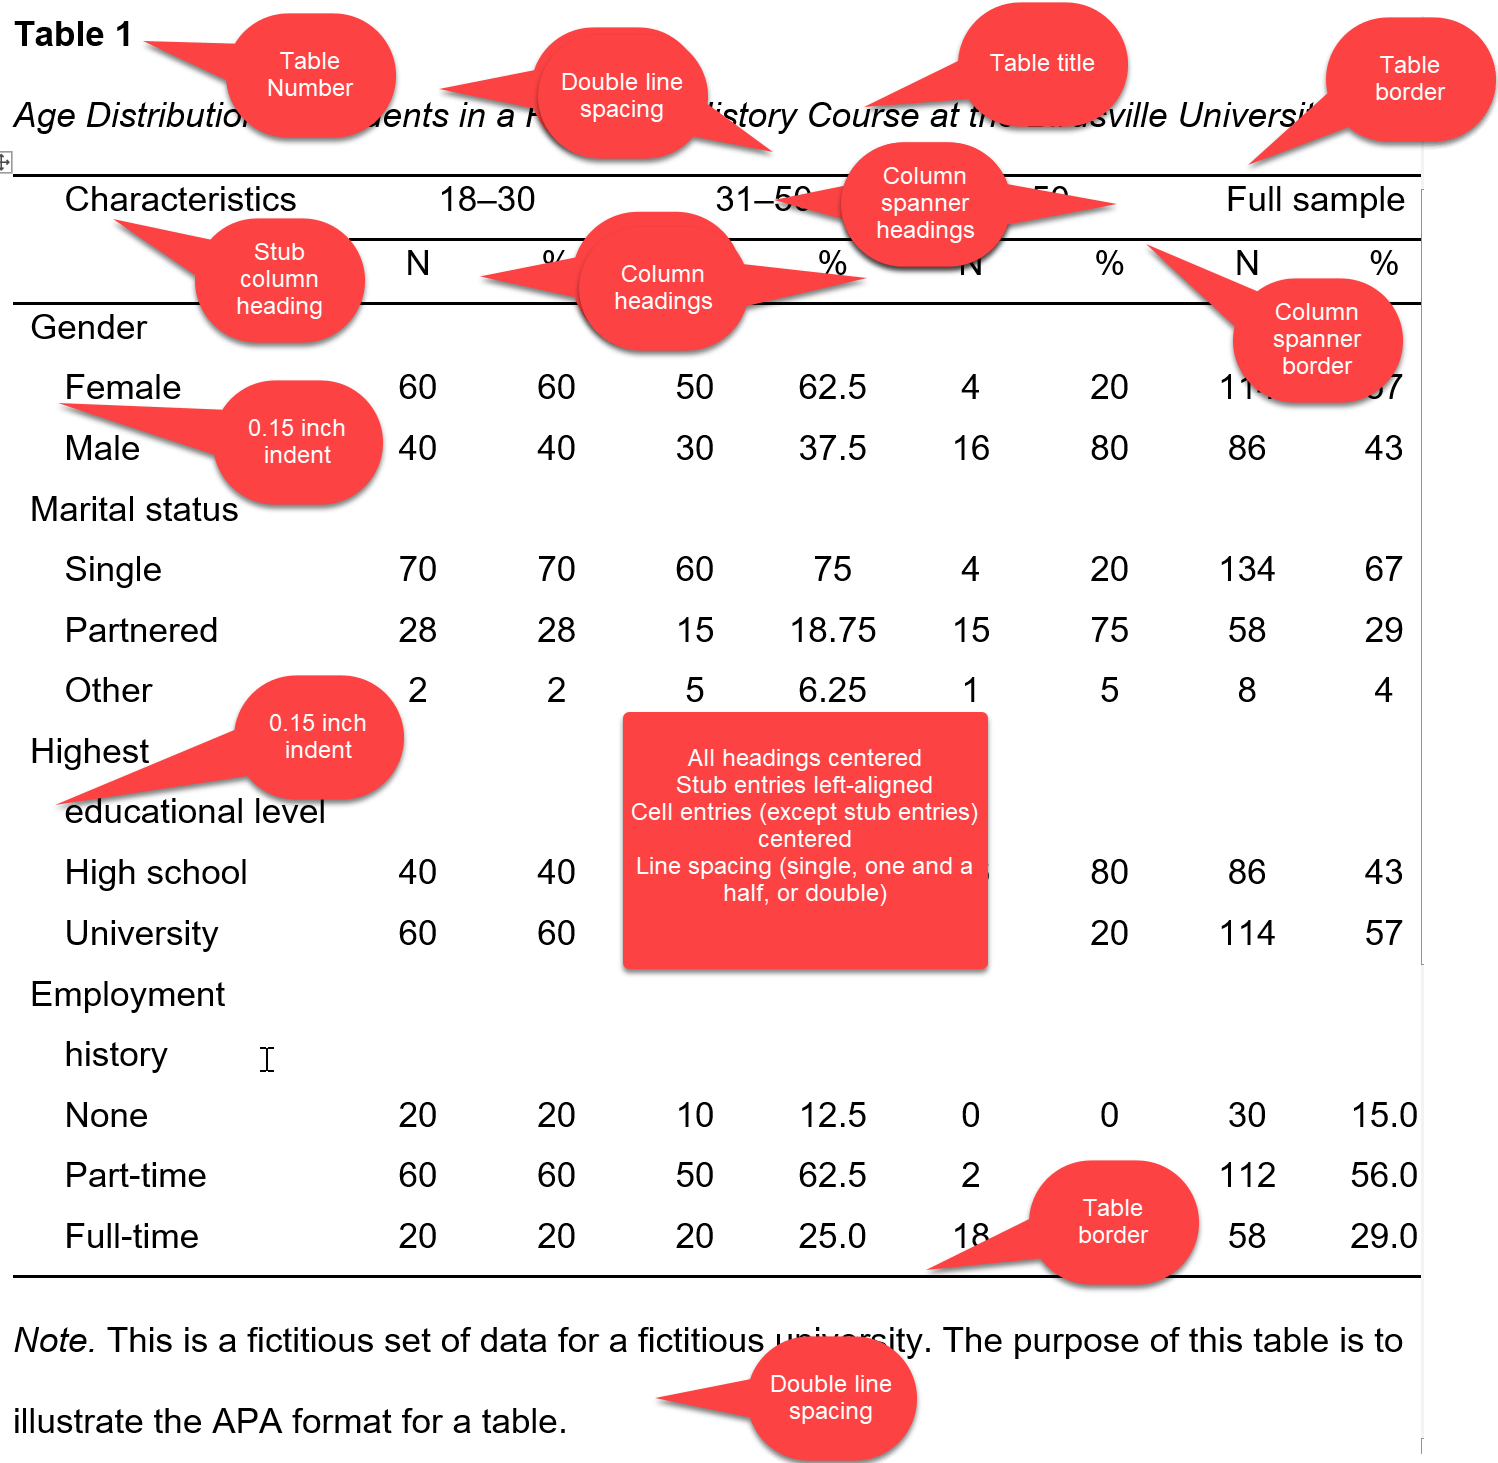 This screenshot illustrates the APA format for a table. The table includes headers, numerical data in cells, and appropriate formatting such as bold headings and double line spacing. The columns represent different variables, and the rows display corresponding values. The table is properly titled and follows APA guidelines for structure and presentation.